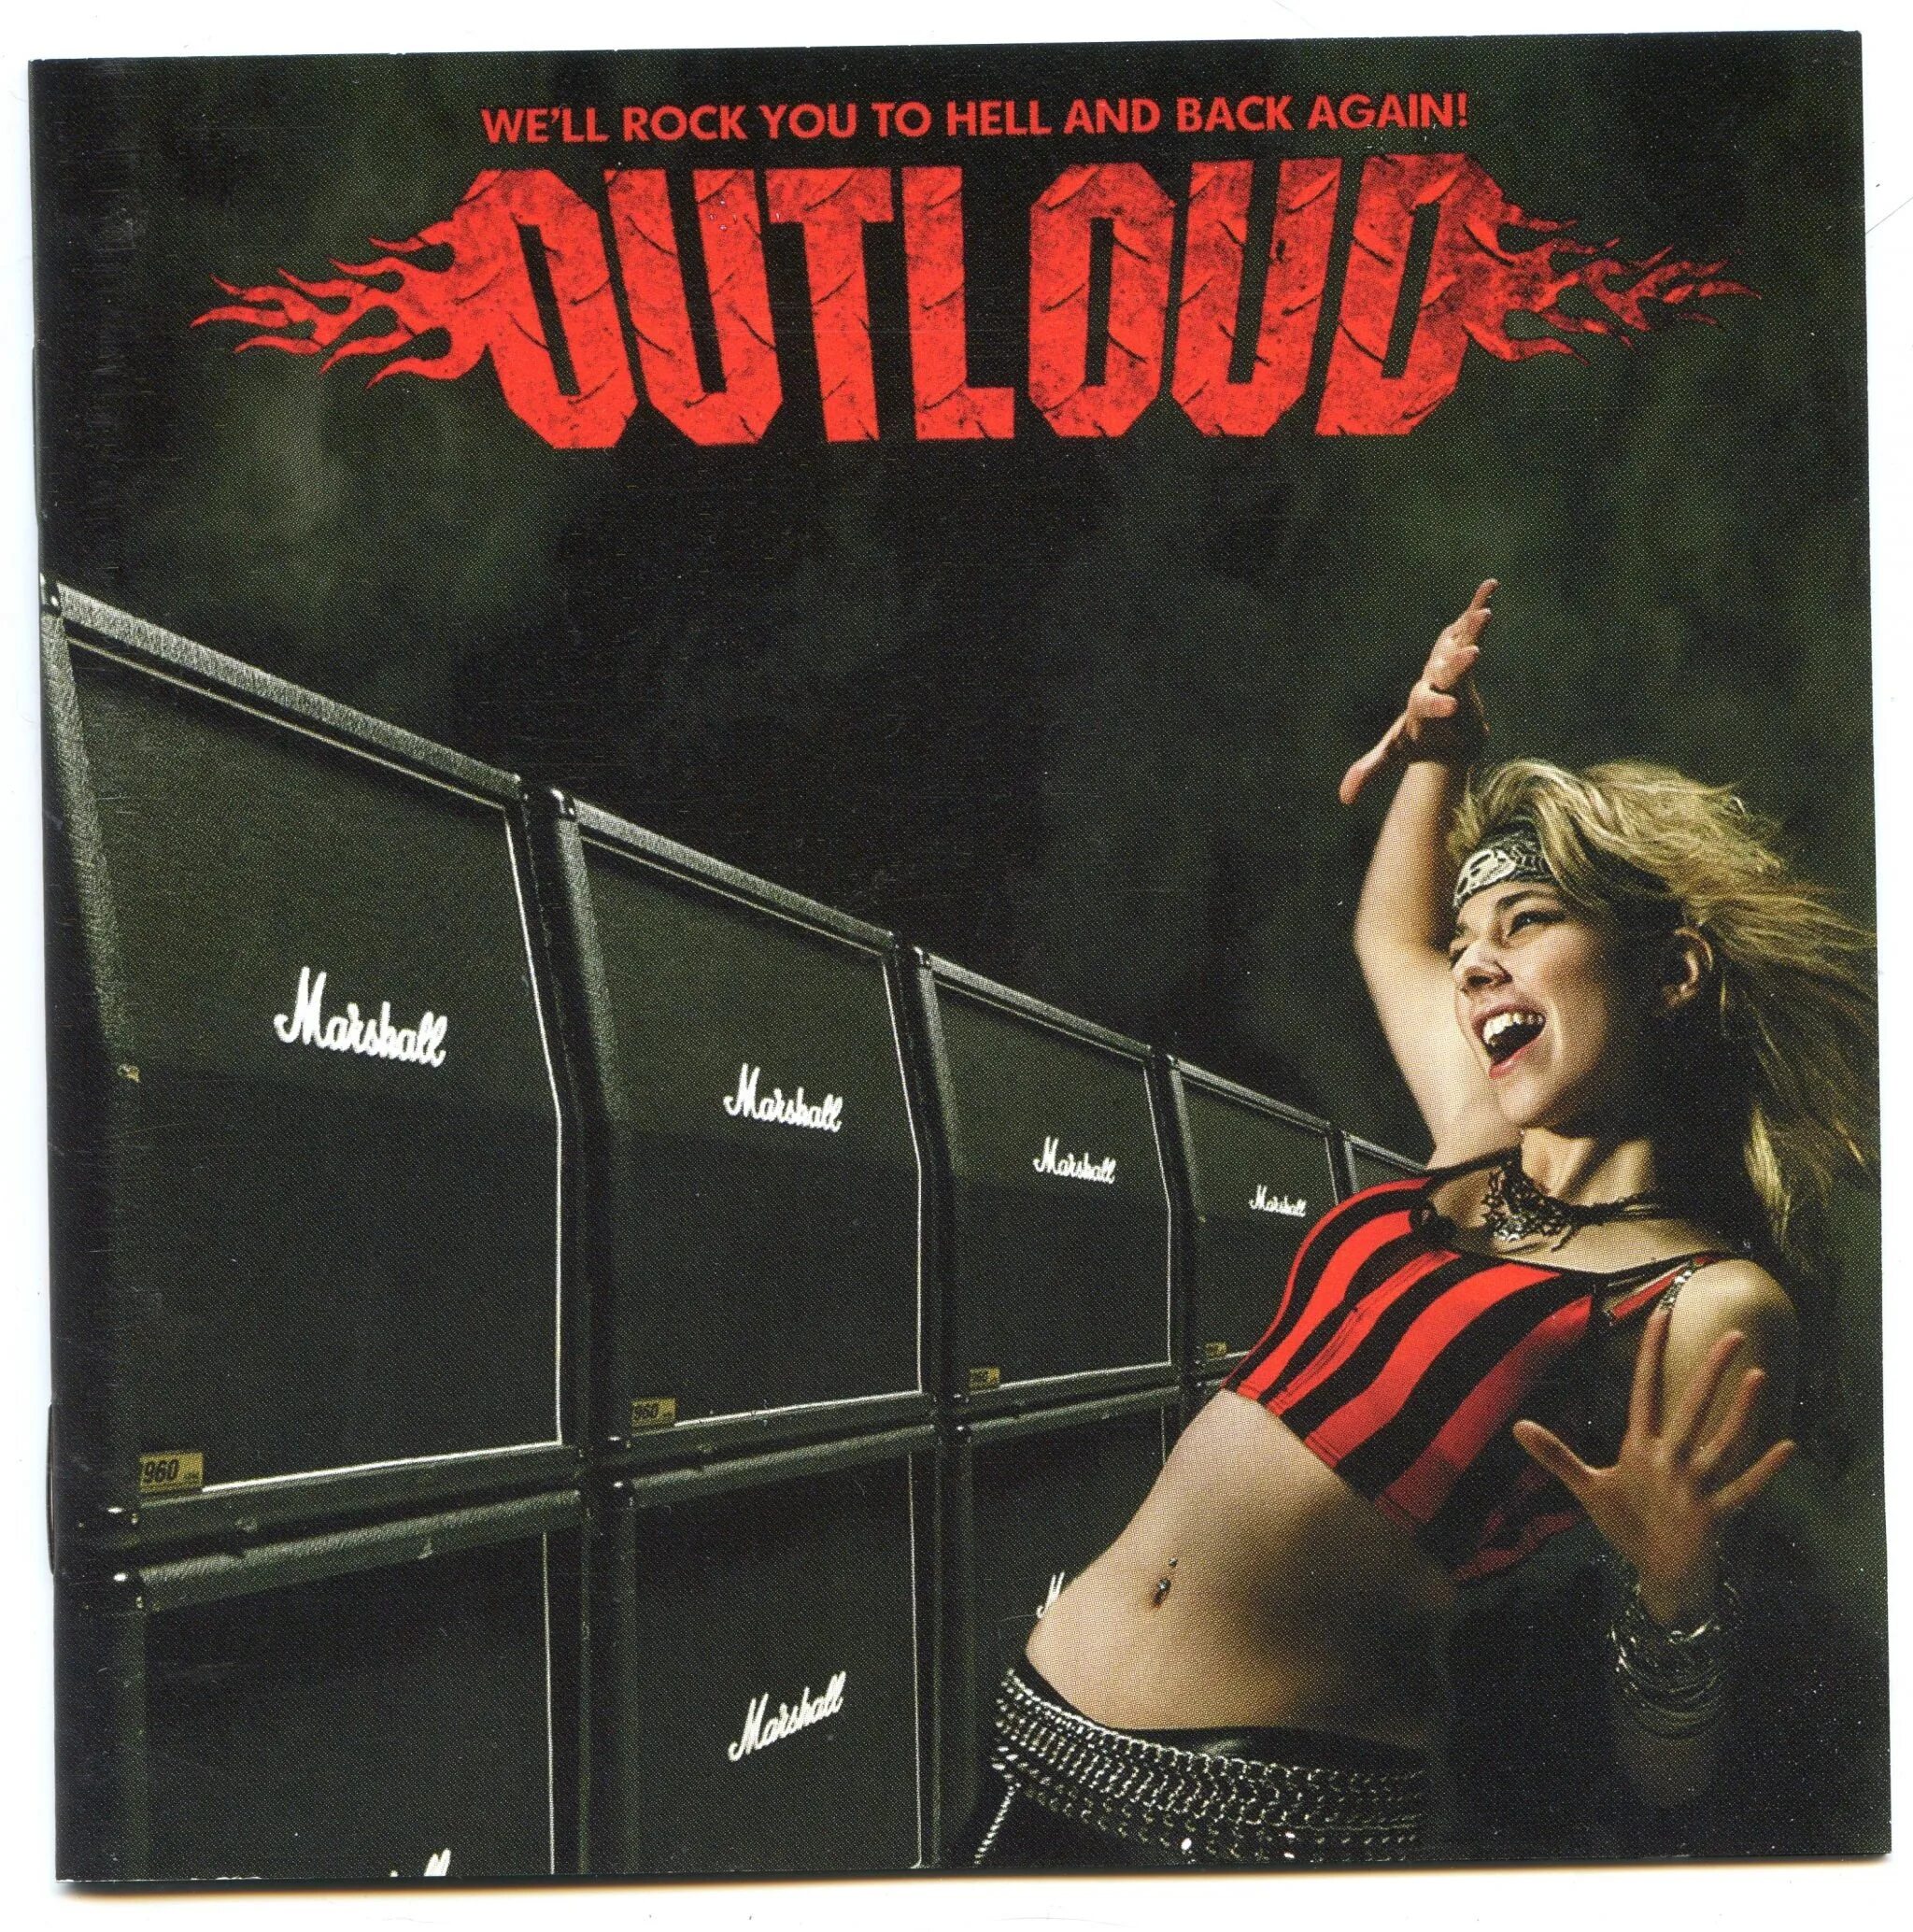 2009 flac. Outloud - we'll Rock you to Hell and back again!. Out Loud группа. Hell Rock to. Lossless музыка.